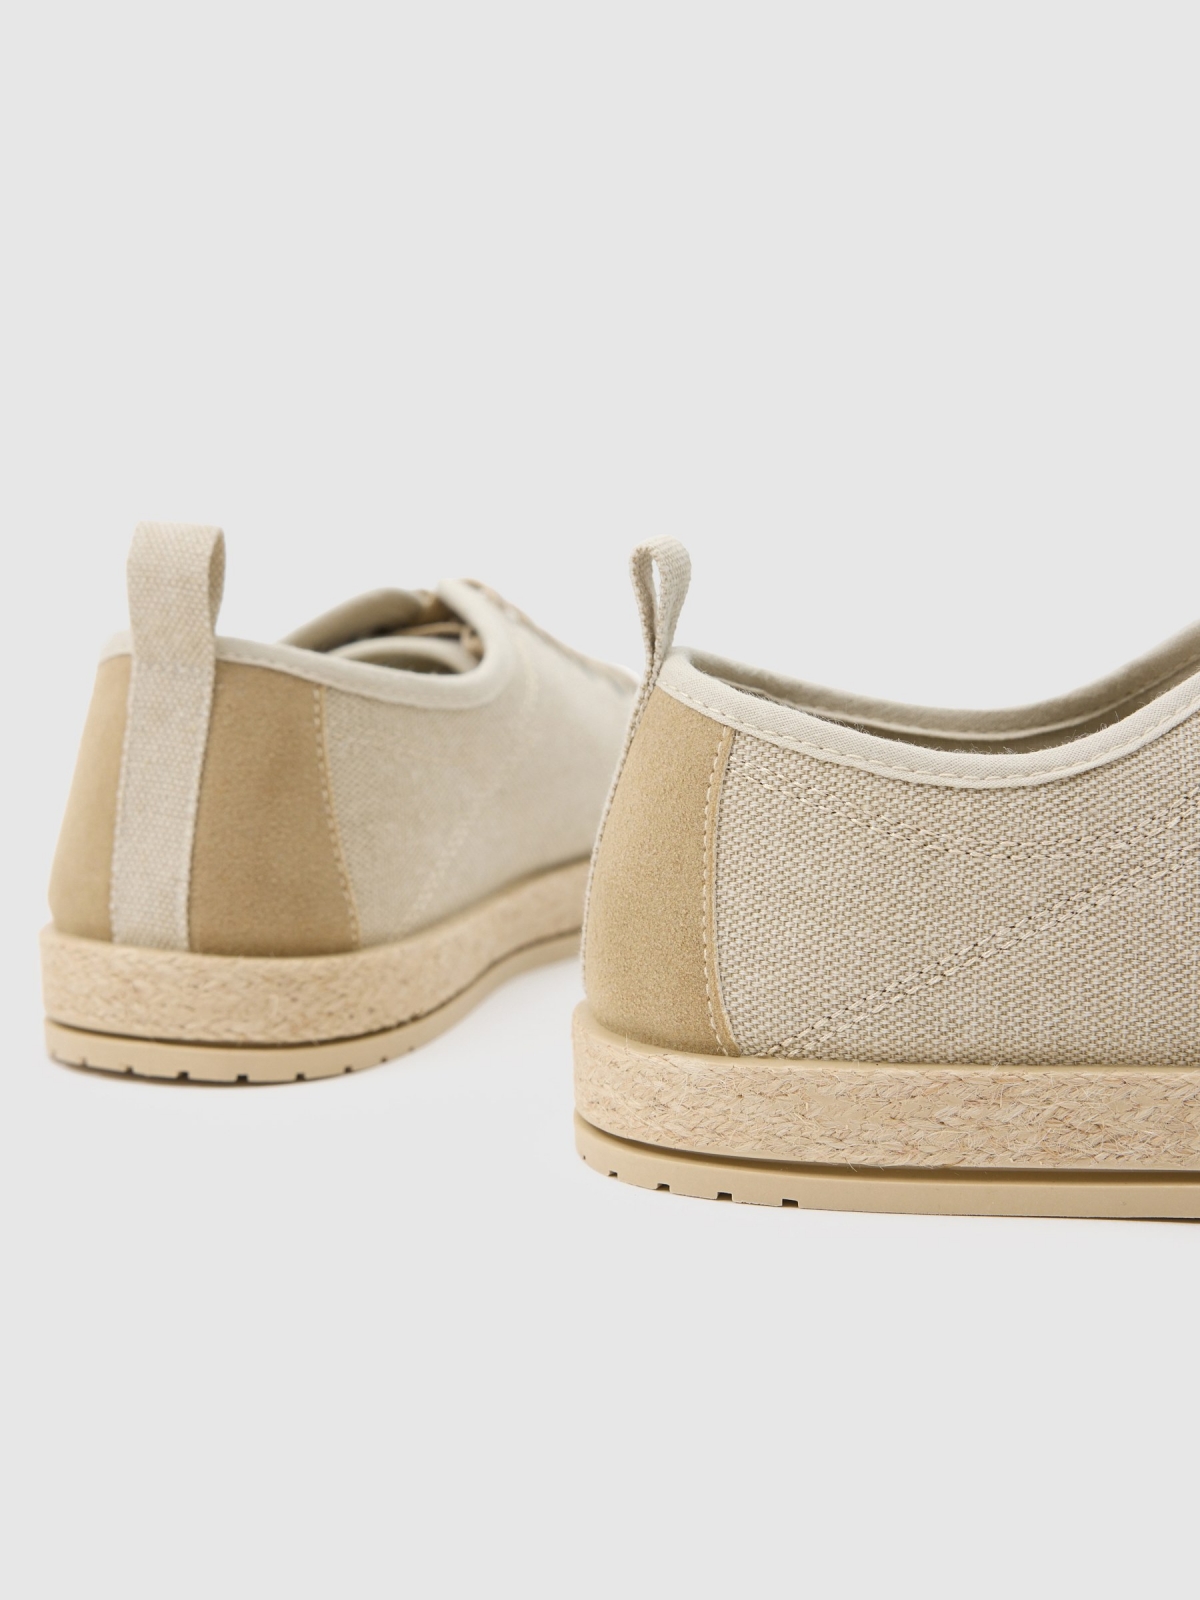 Espadrille style sneaker sand detail view